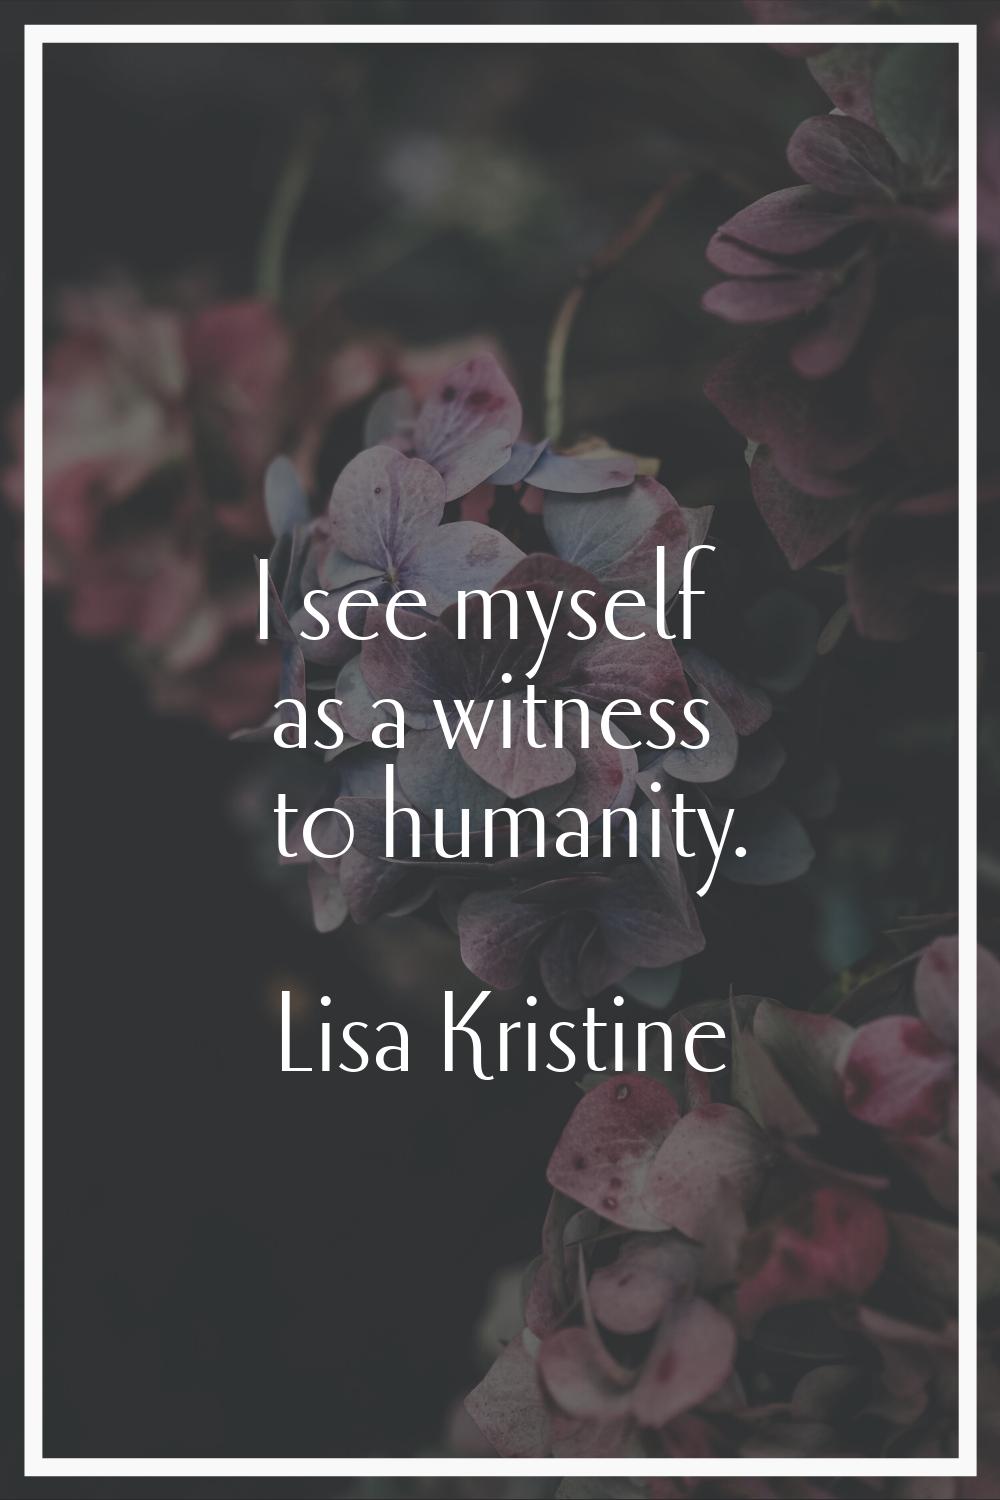 I see myself as a witness to humanity.